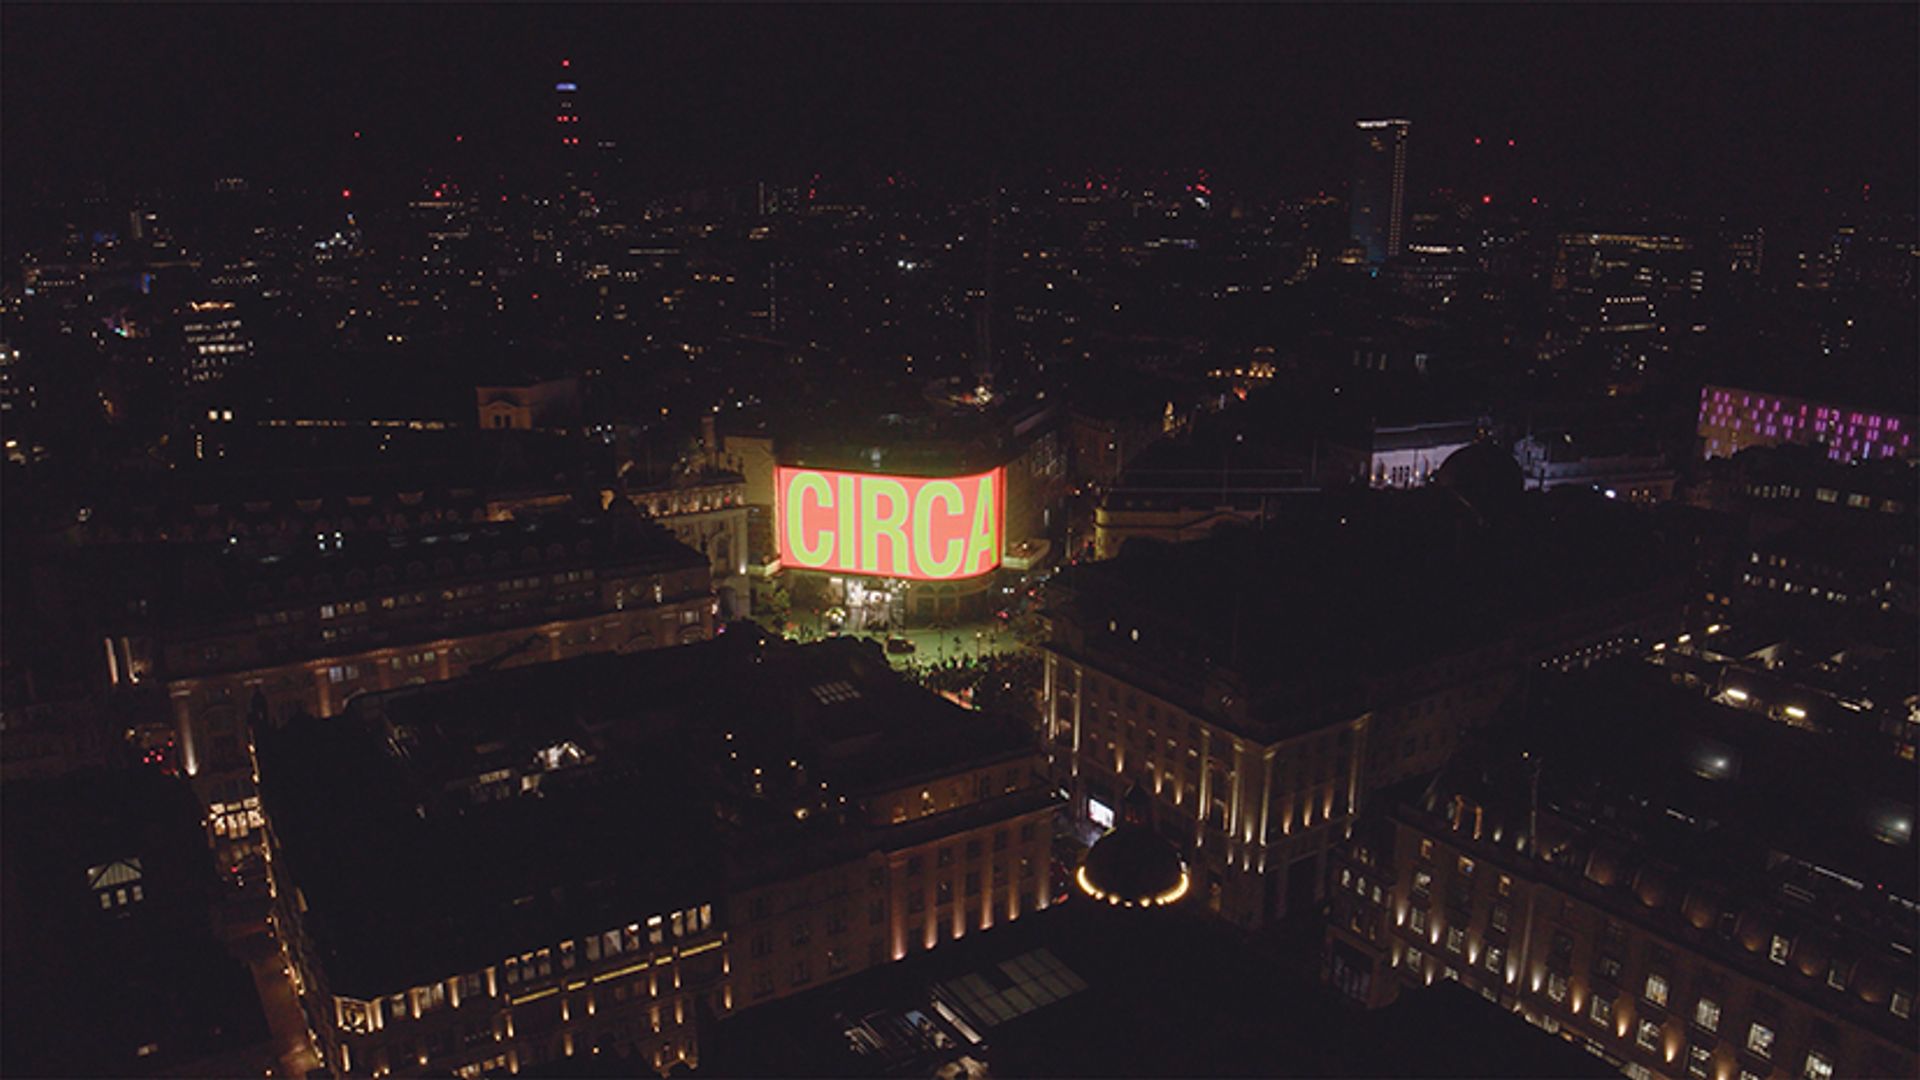 Circa takes place at Piccadilly Circus and across billboards around the world 

Courtesy Circa Art Ltd